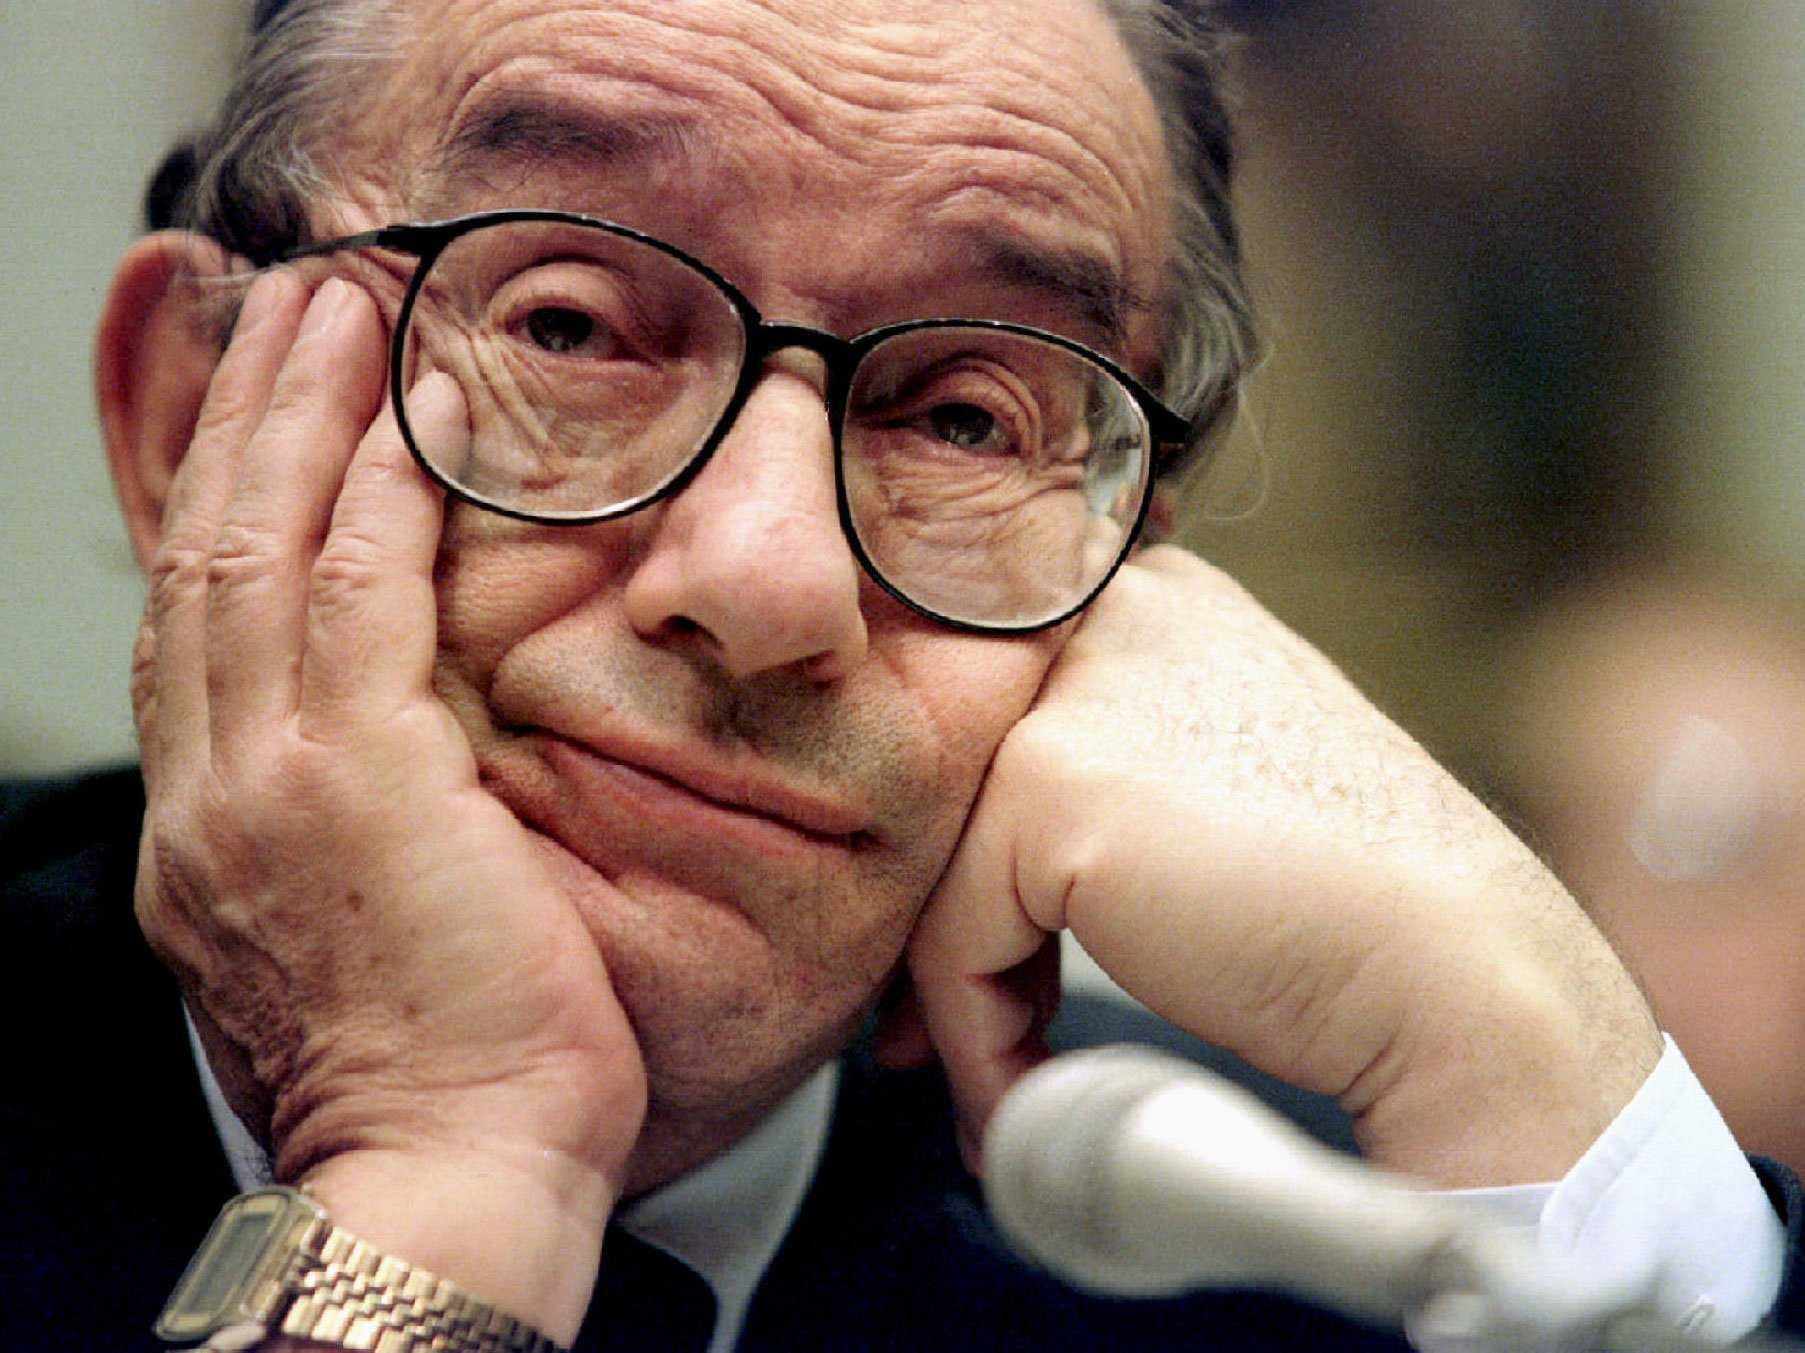 on-this-day-in-1996-alan-greenspan-made-his-famous-speech-about-irrational-exuberance.jpg